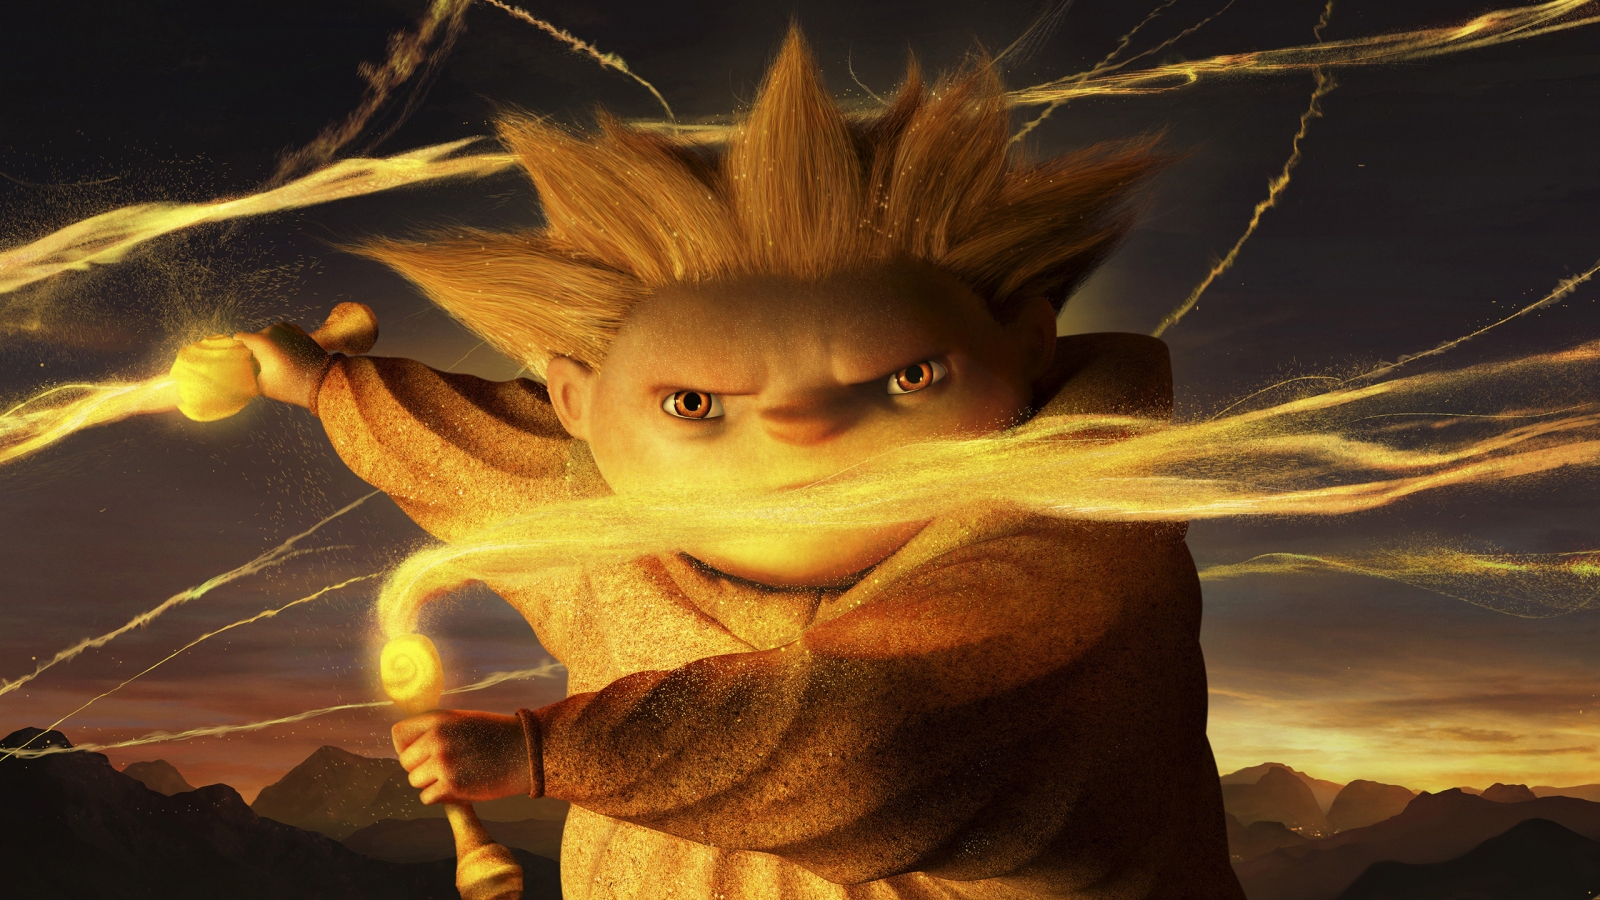 The Sandman Rise Of The Guardians for 1600 x 900 HDTV resolution